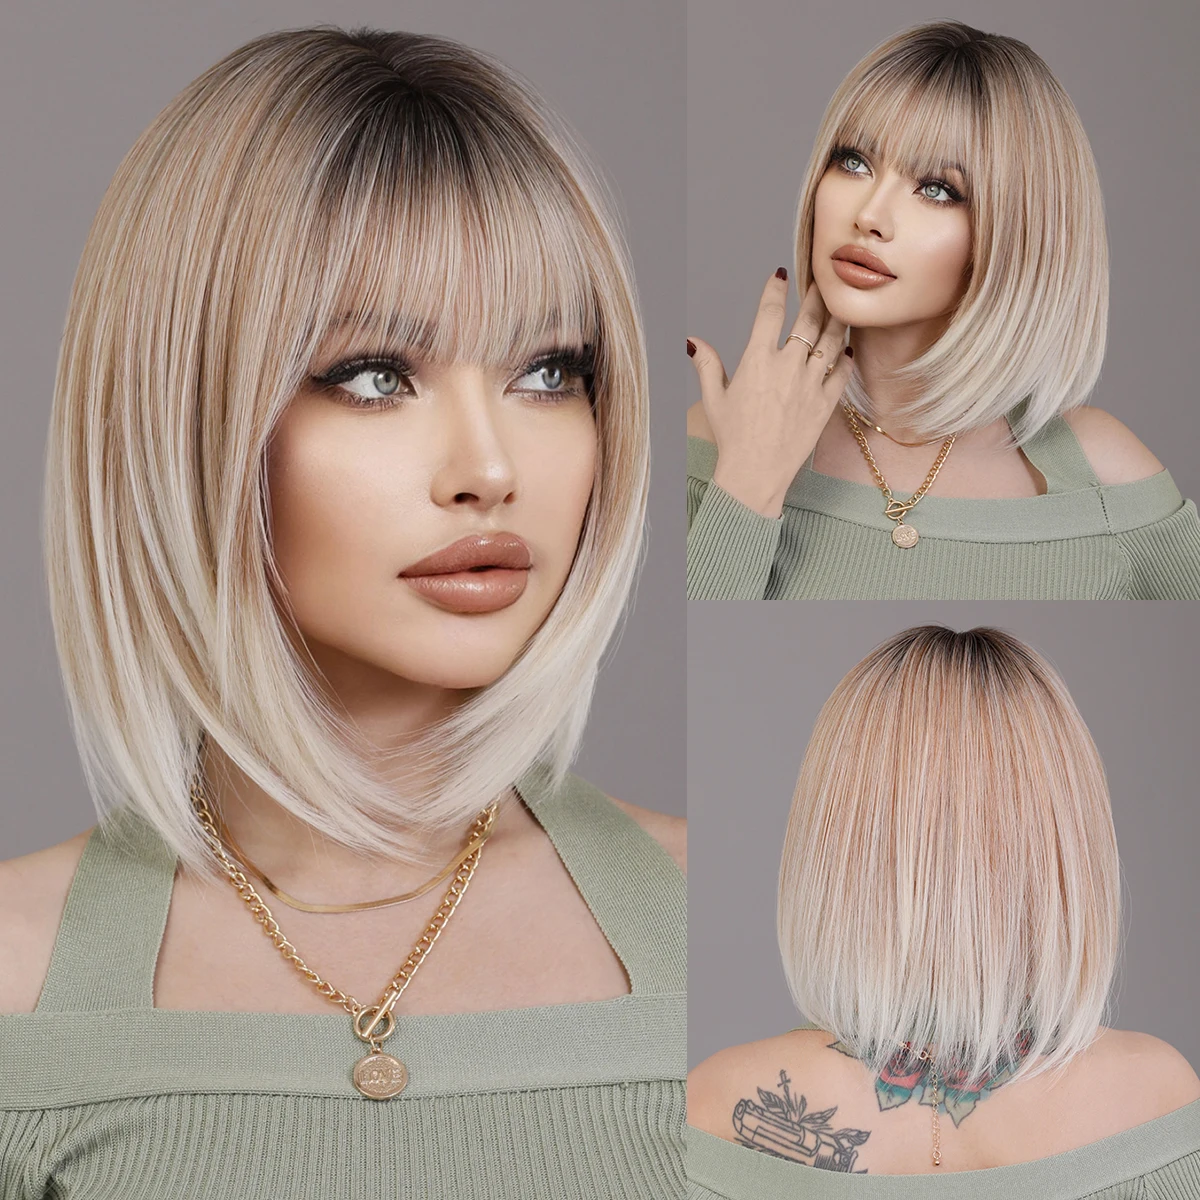 

NAMM Ash Ombre Bob Blonde Women Wig for Women Daily Party Short Straight Wigs Synthetic Wigs with Fluffy Bangs Heat Resistant